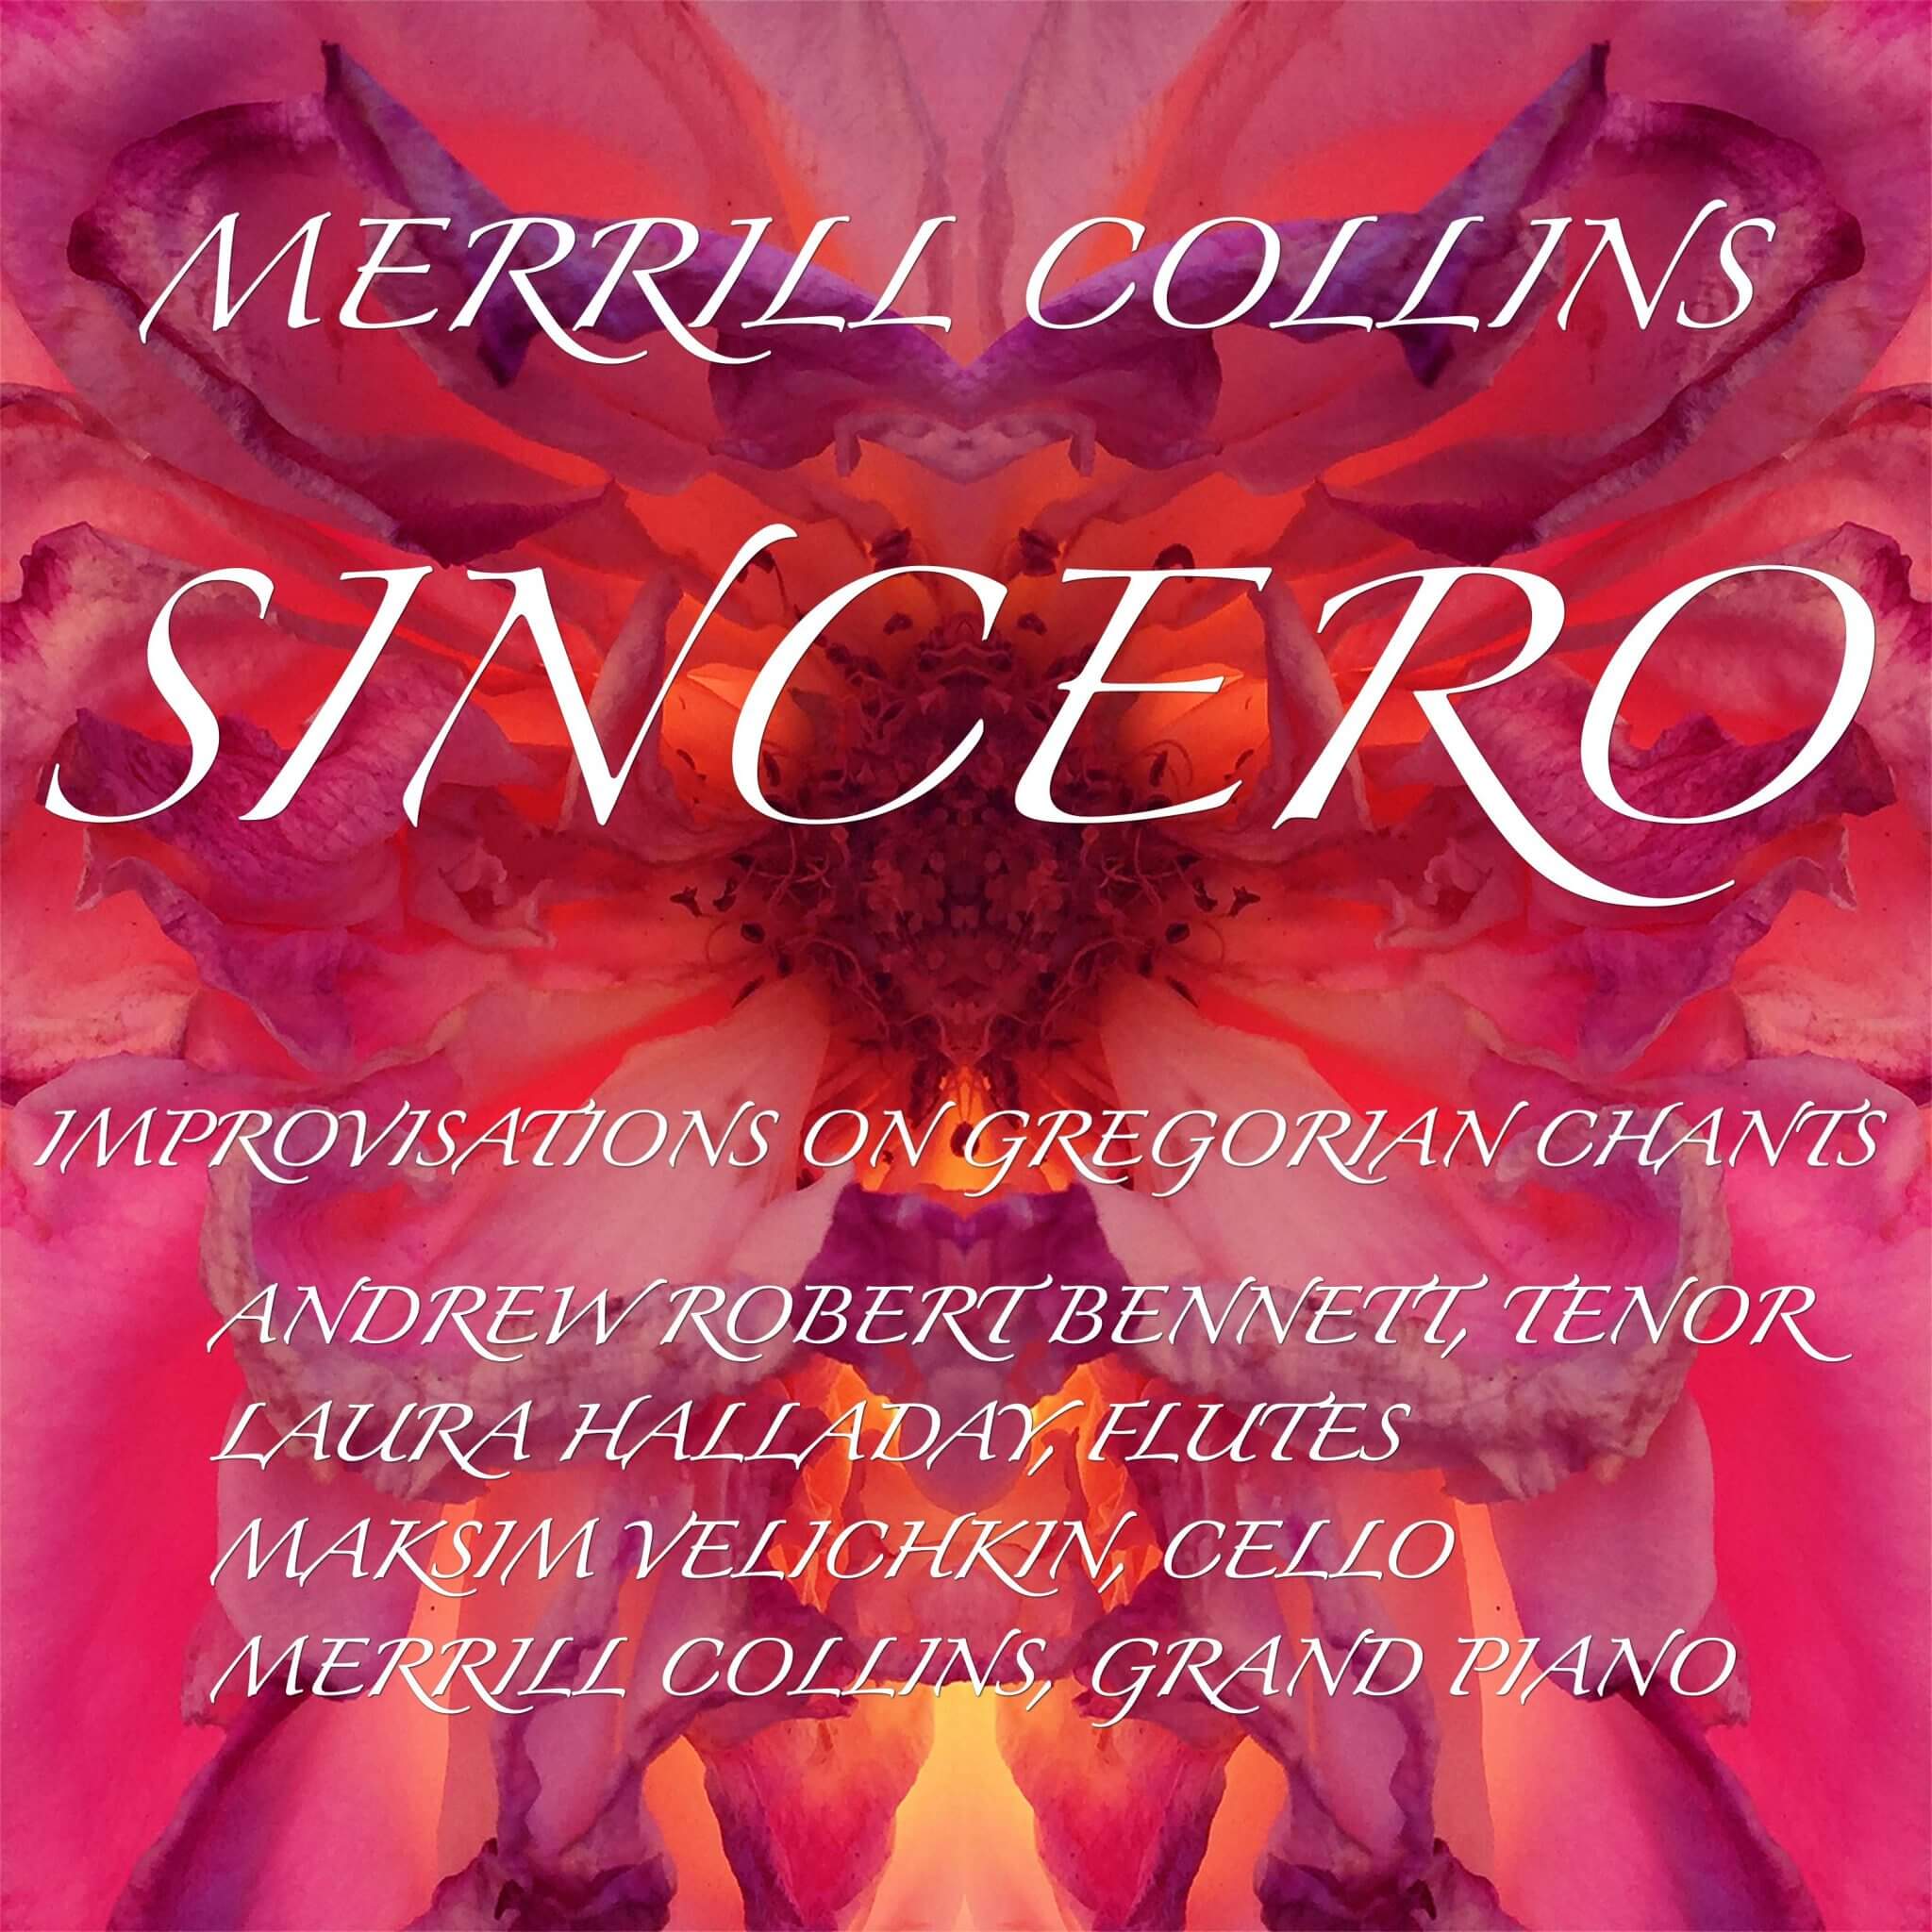 Serenely peaceful world-class improvisations on Gregorian Chants Merrill Collins